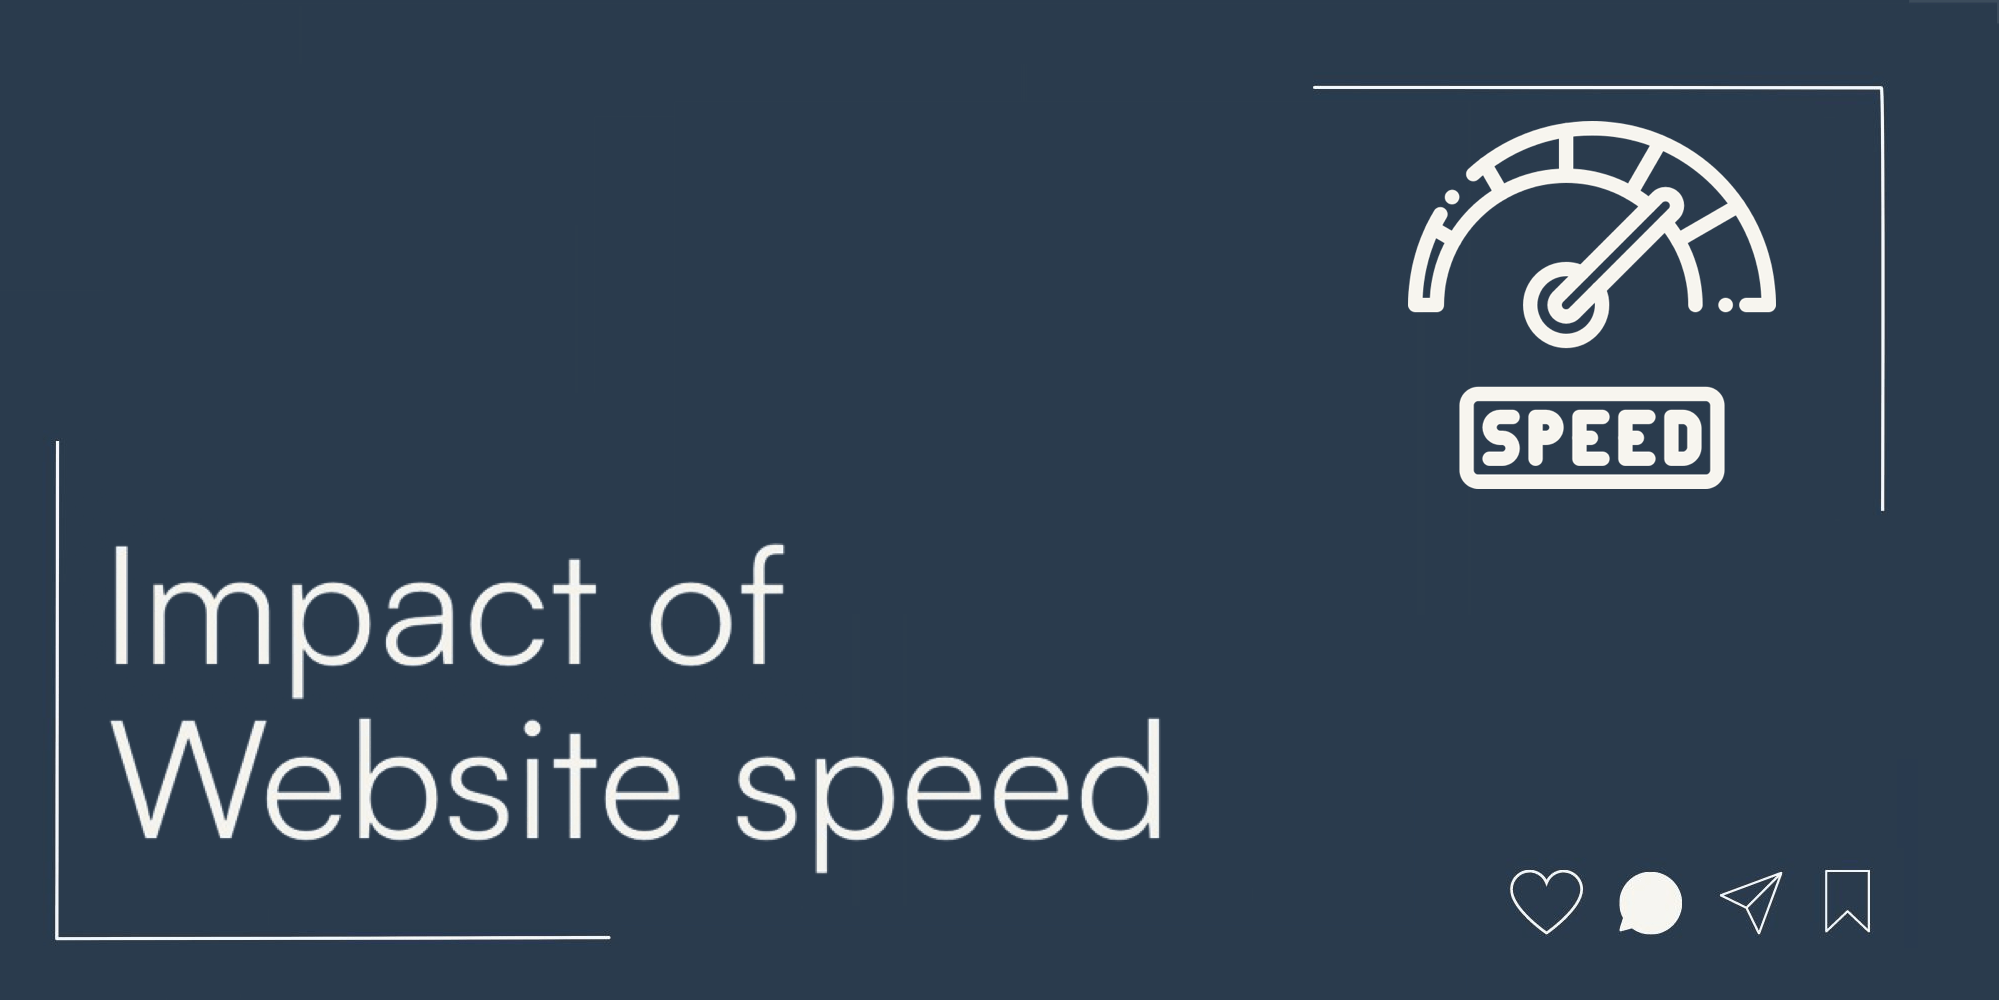 website speed image cover